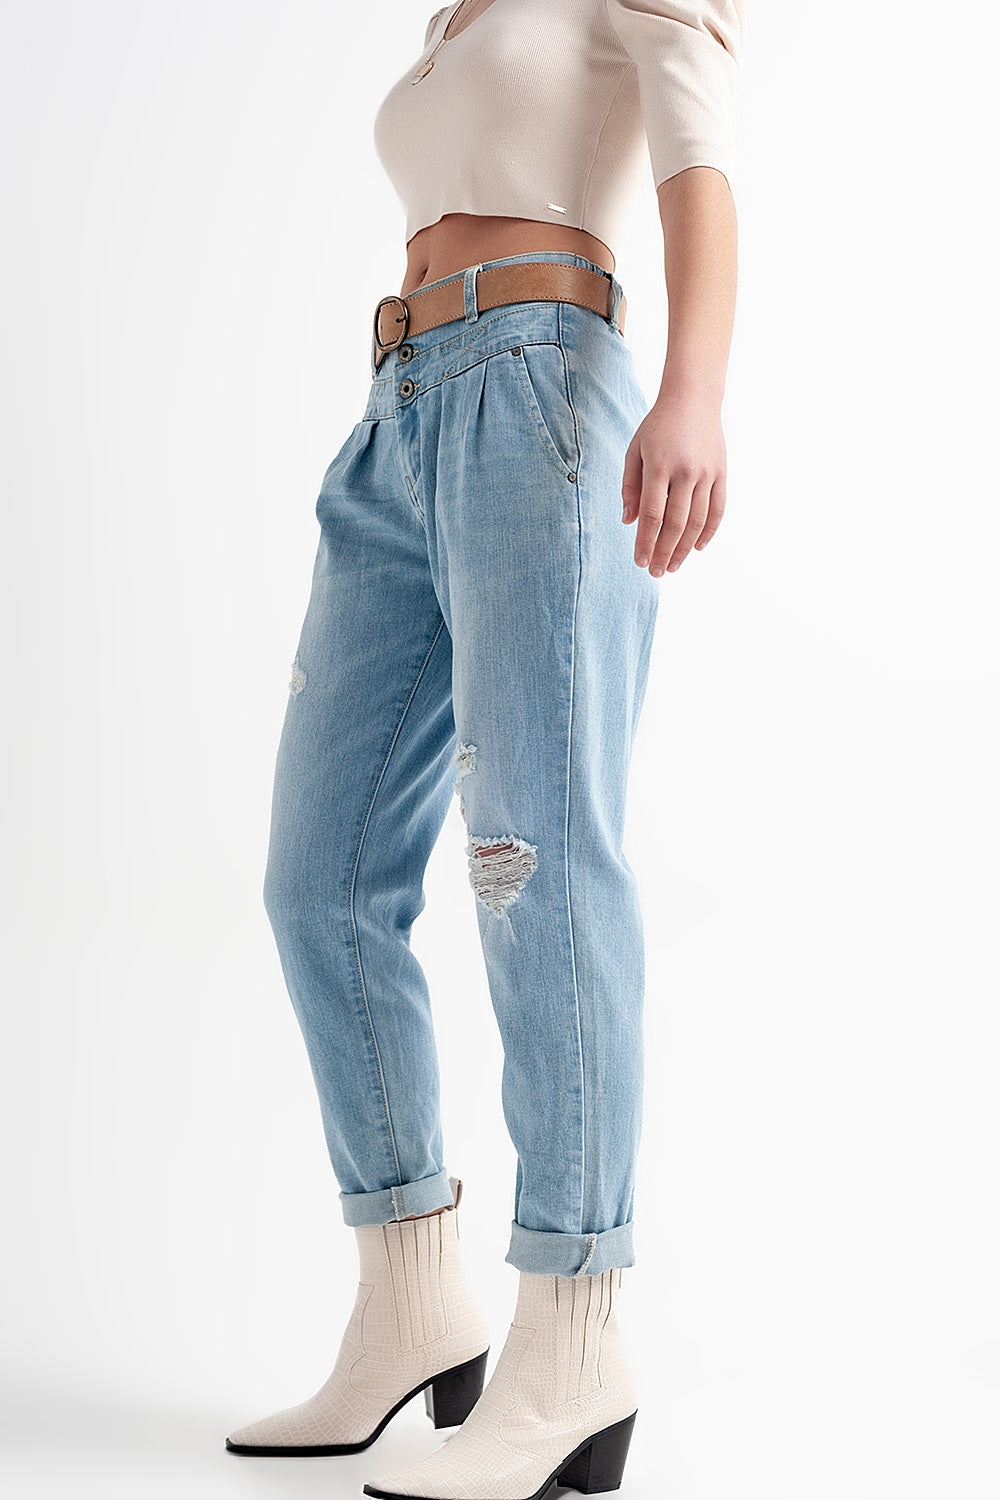 Jean with double waistband in blue with rips Szua Store